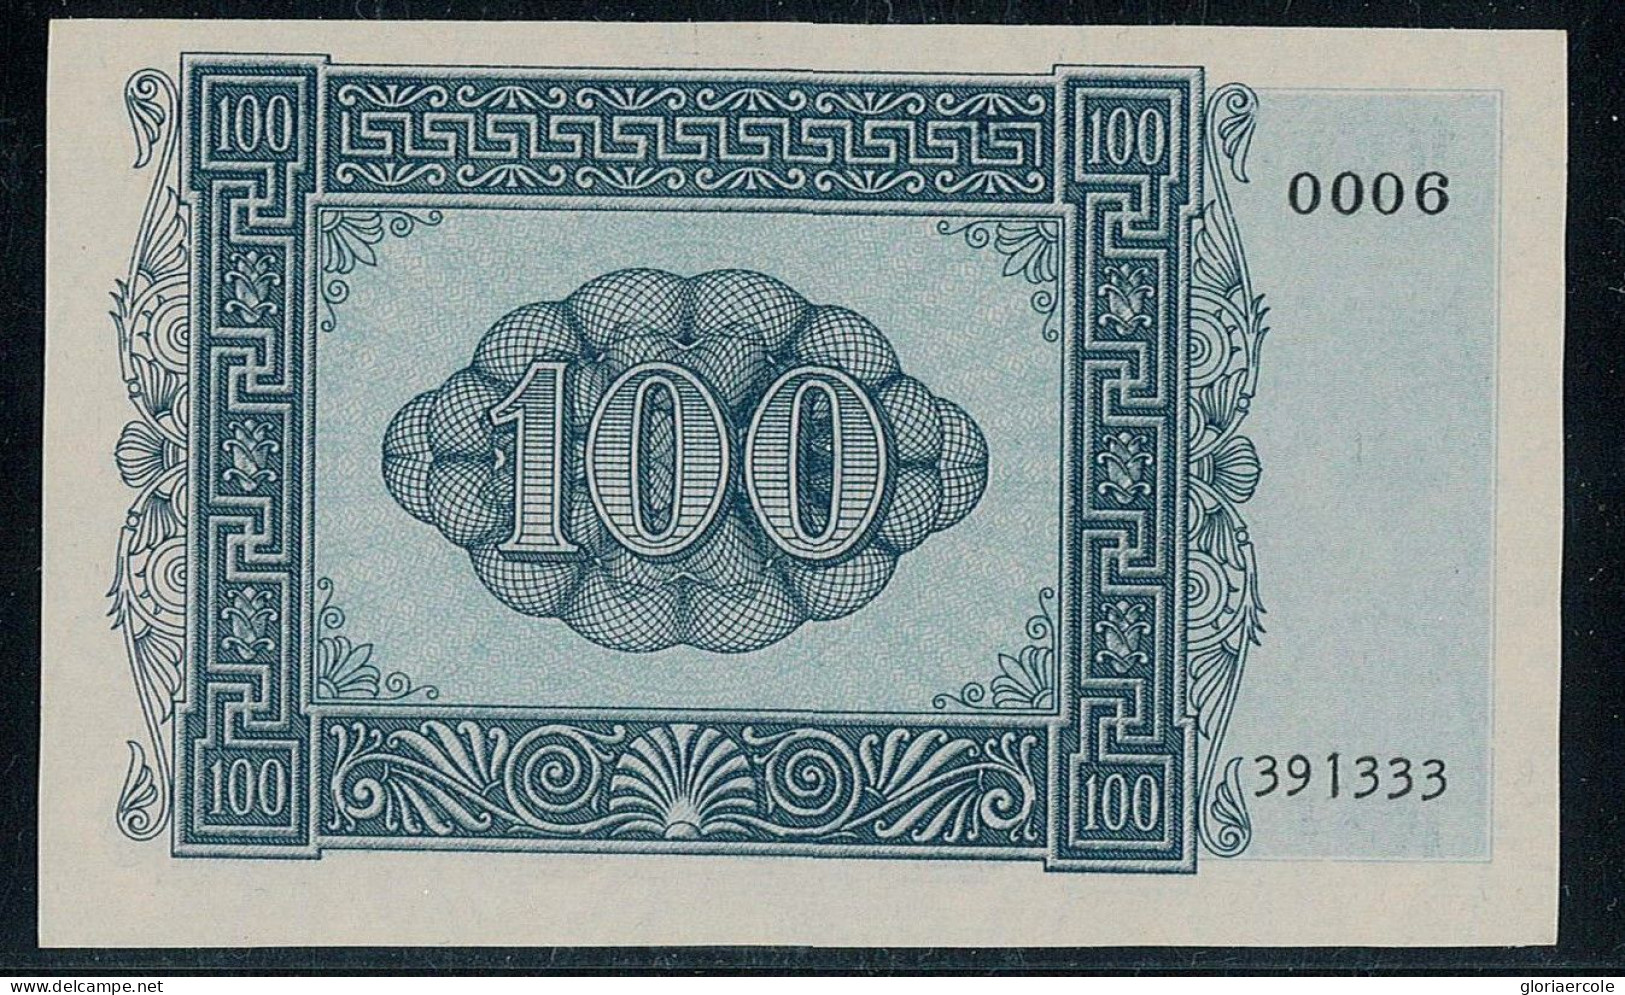 P2732 - ITALIAN OCCUPATION OF THE JONIAN ISLANDS 100 DRACHMA UNC. CONSECUTIVE NUMBER!!!!!!!!!!! ITALIAQN CAT. OL 91 - Other - Europe